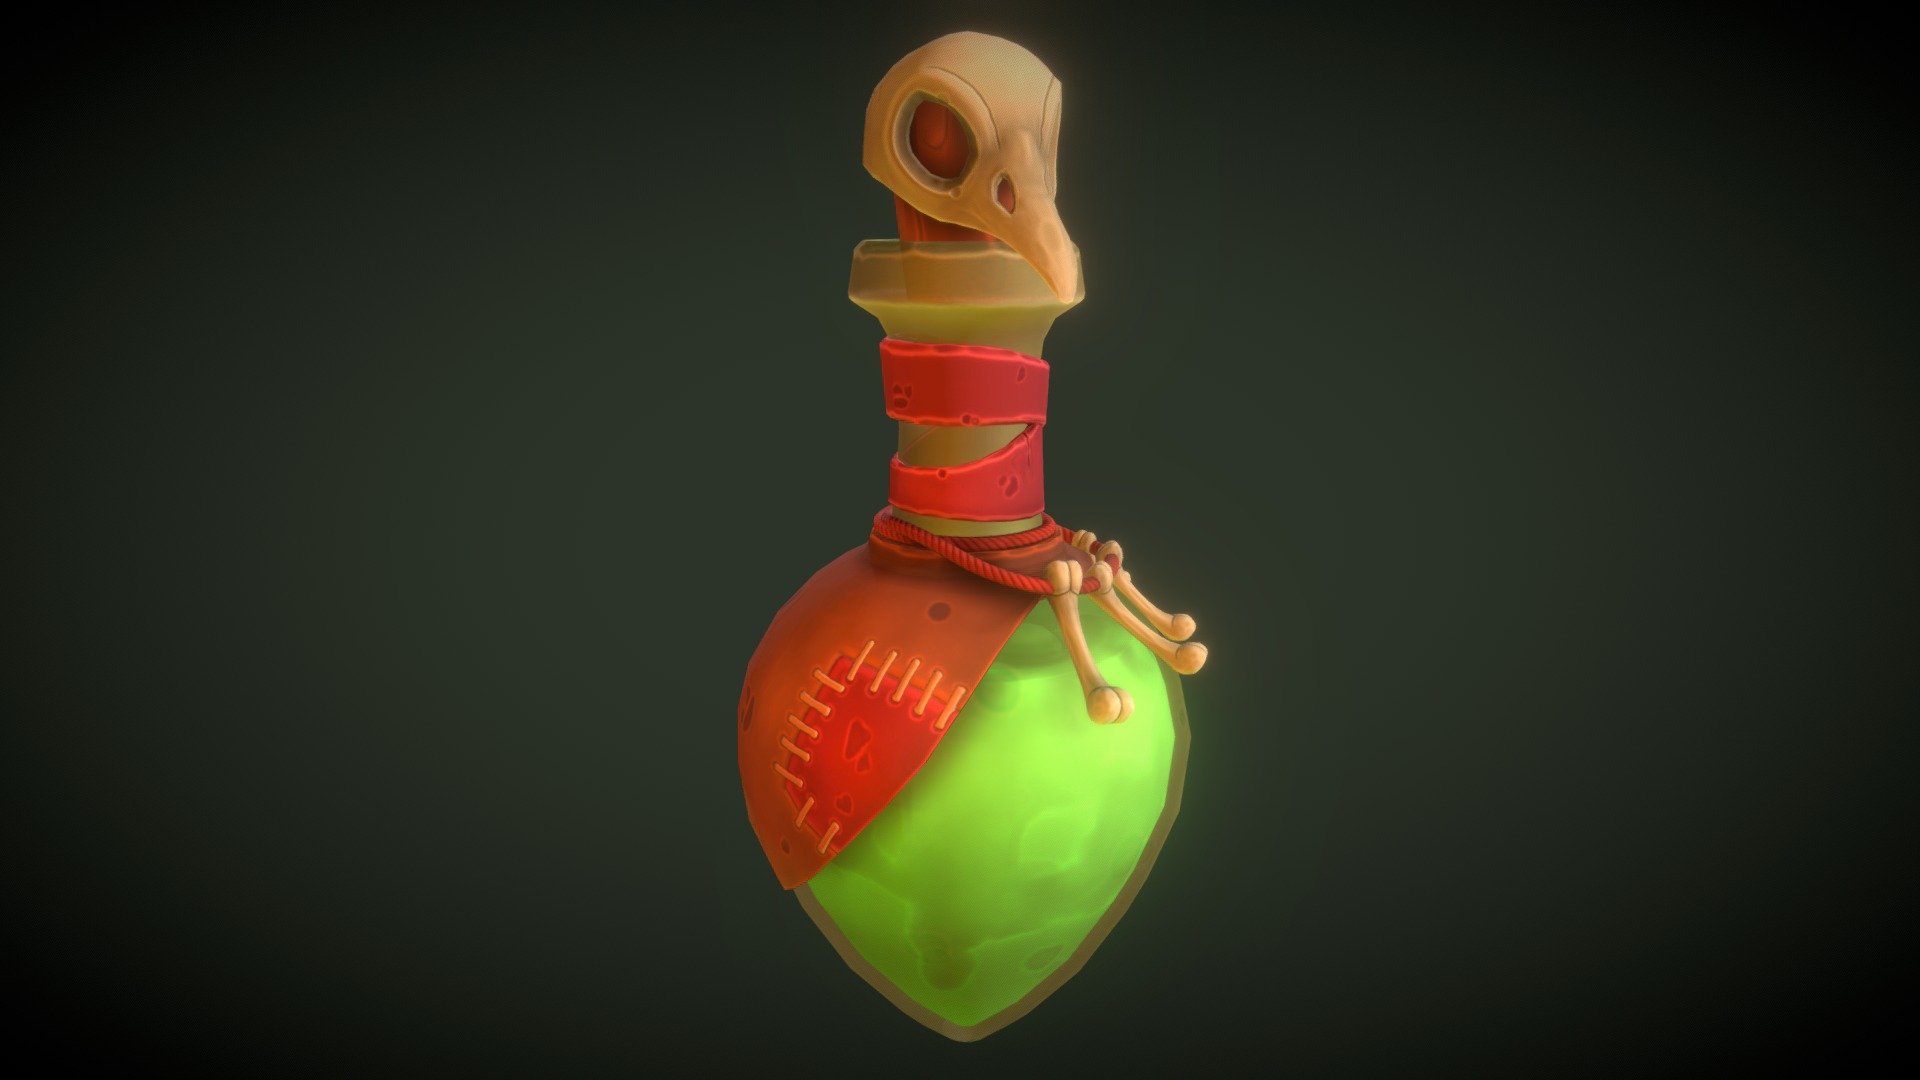 Shaman Potion
Modeled in Bender
Texturing in Substancepainter
Textures 2024*2024

New item in my store check it out, Kitchen-Breakfast------------https://skfb.ly/owPT9 - Shaman Potion - Download Free 3D model by Ergoni 3d model